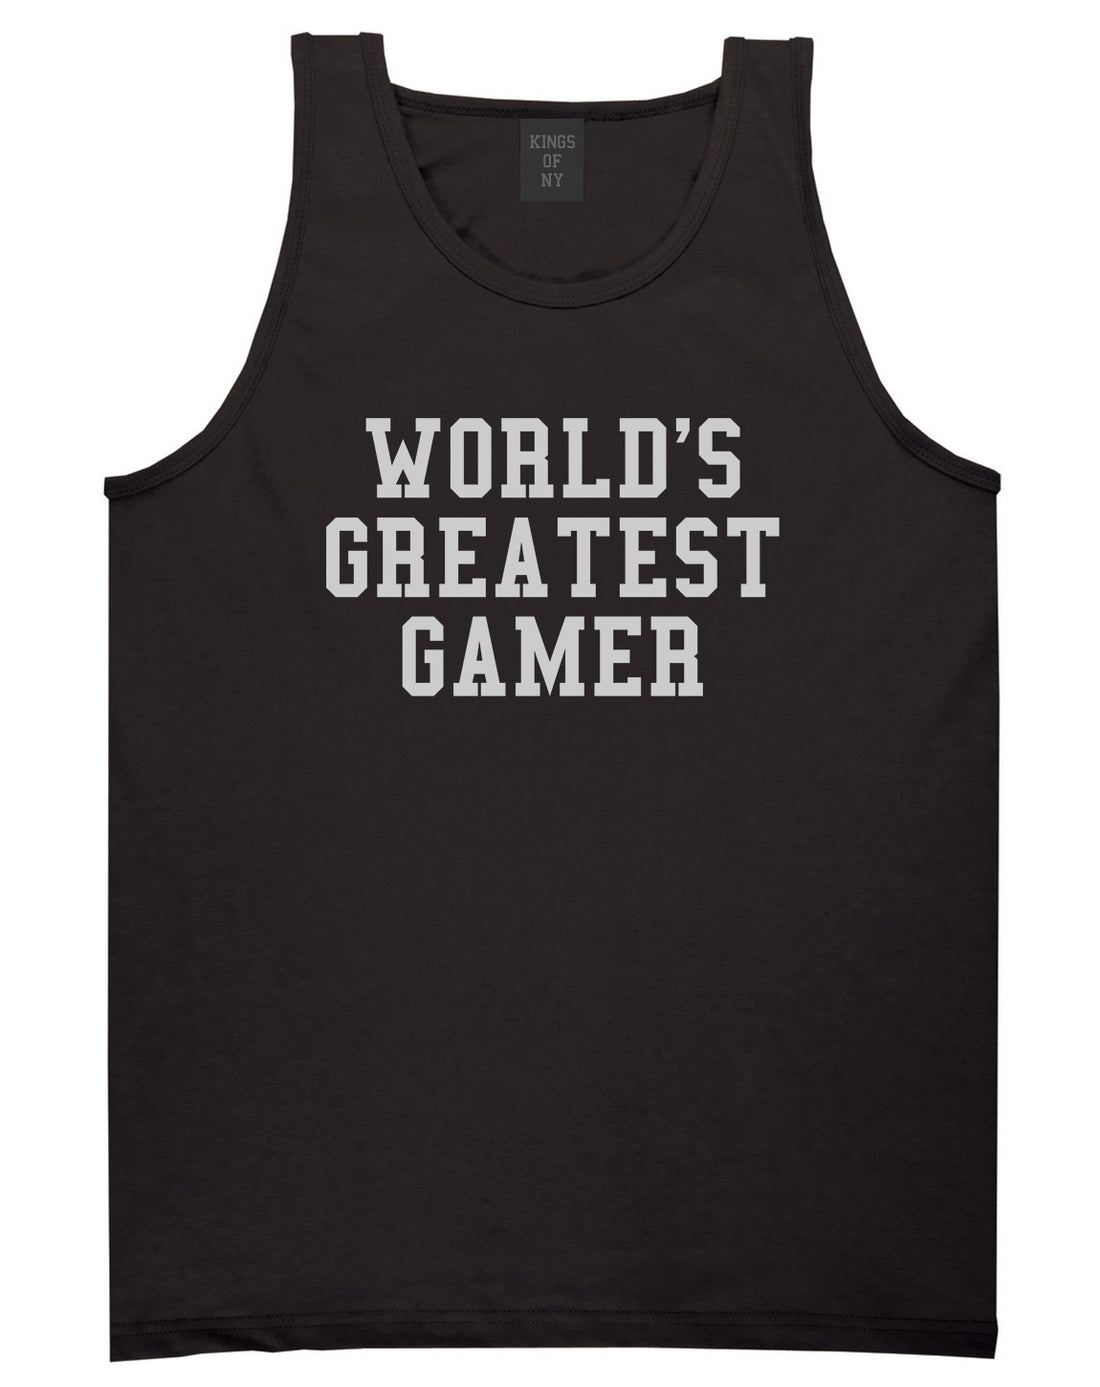 Worlds Greatest Gamer Funny Gaming Mens Tank Top T-Shirt Black